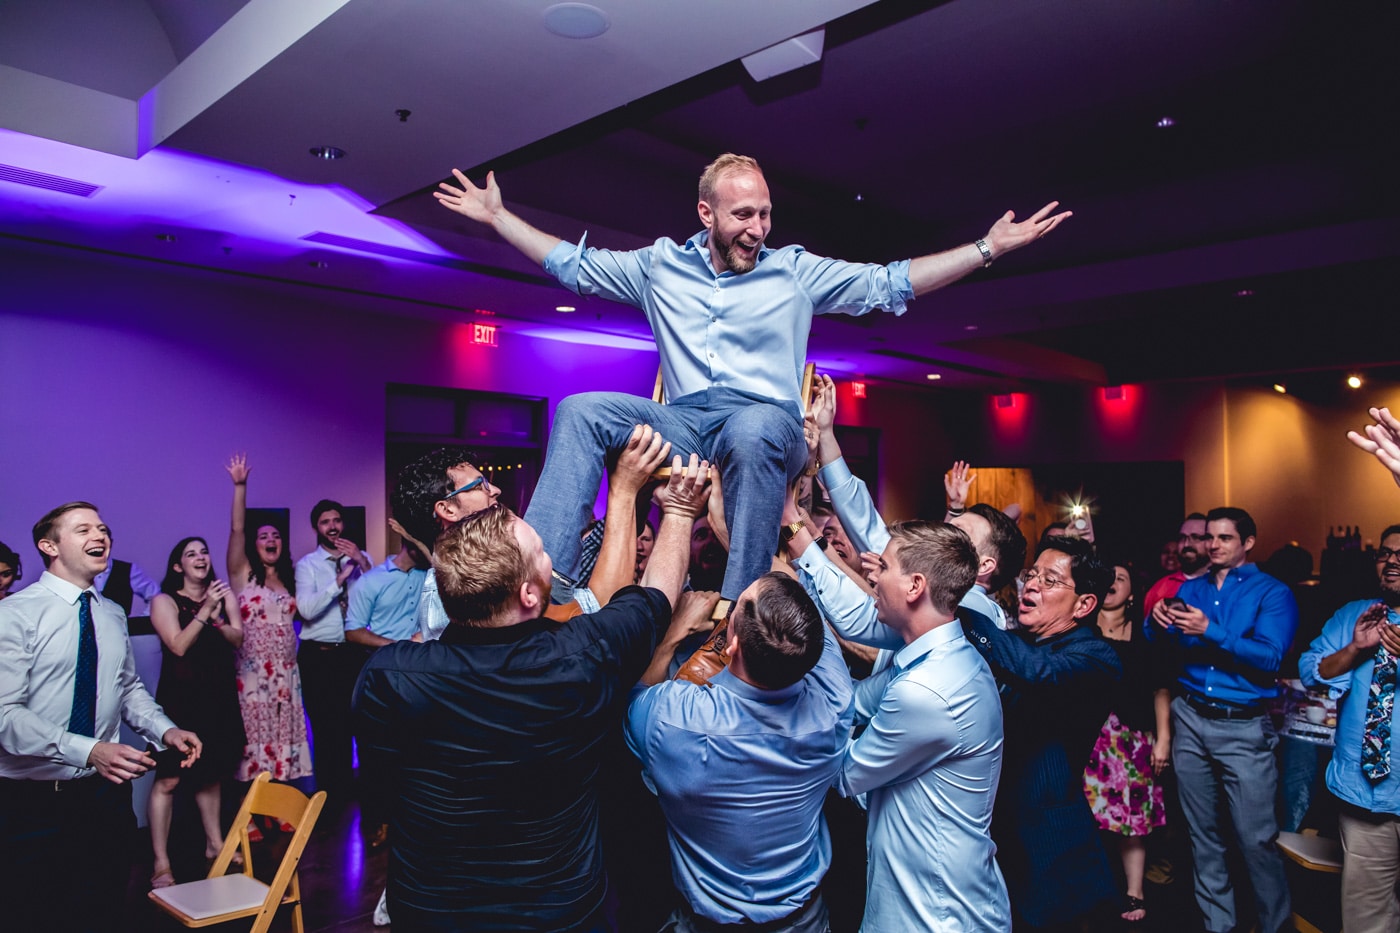 Man on lifted chair at reception